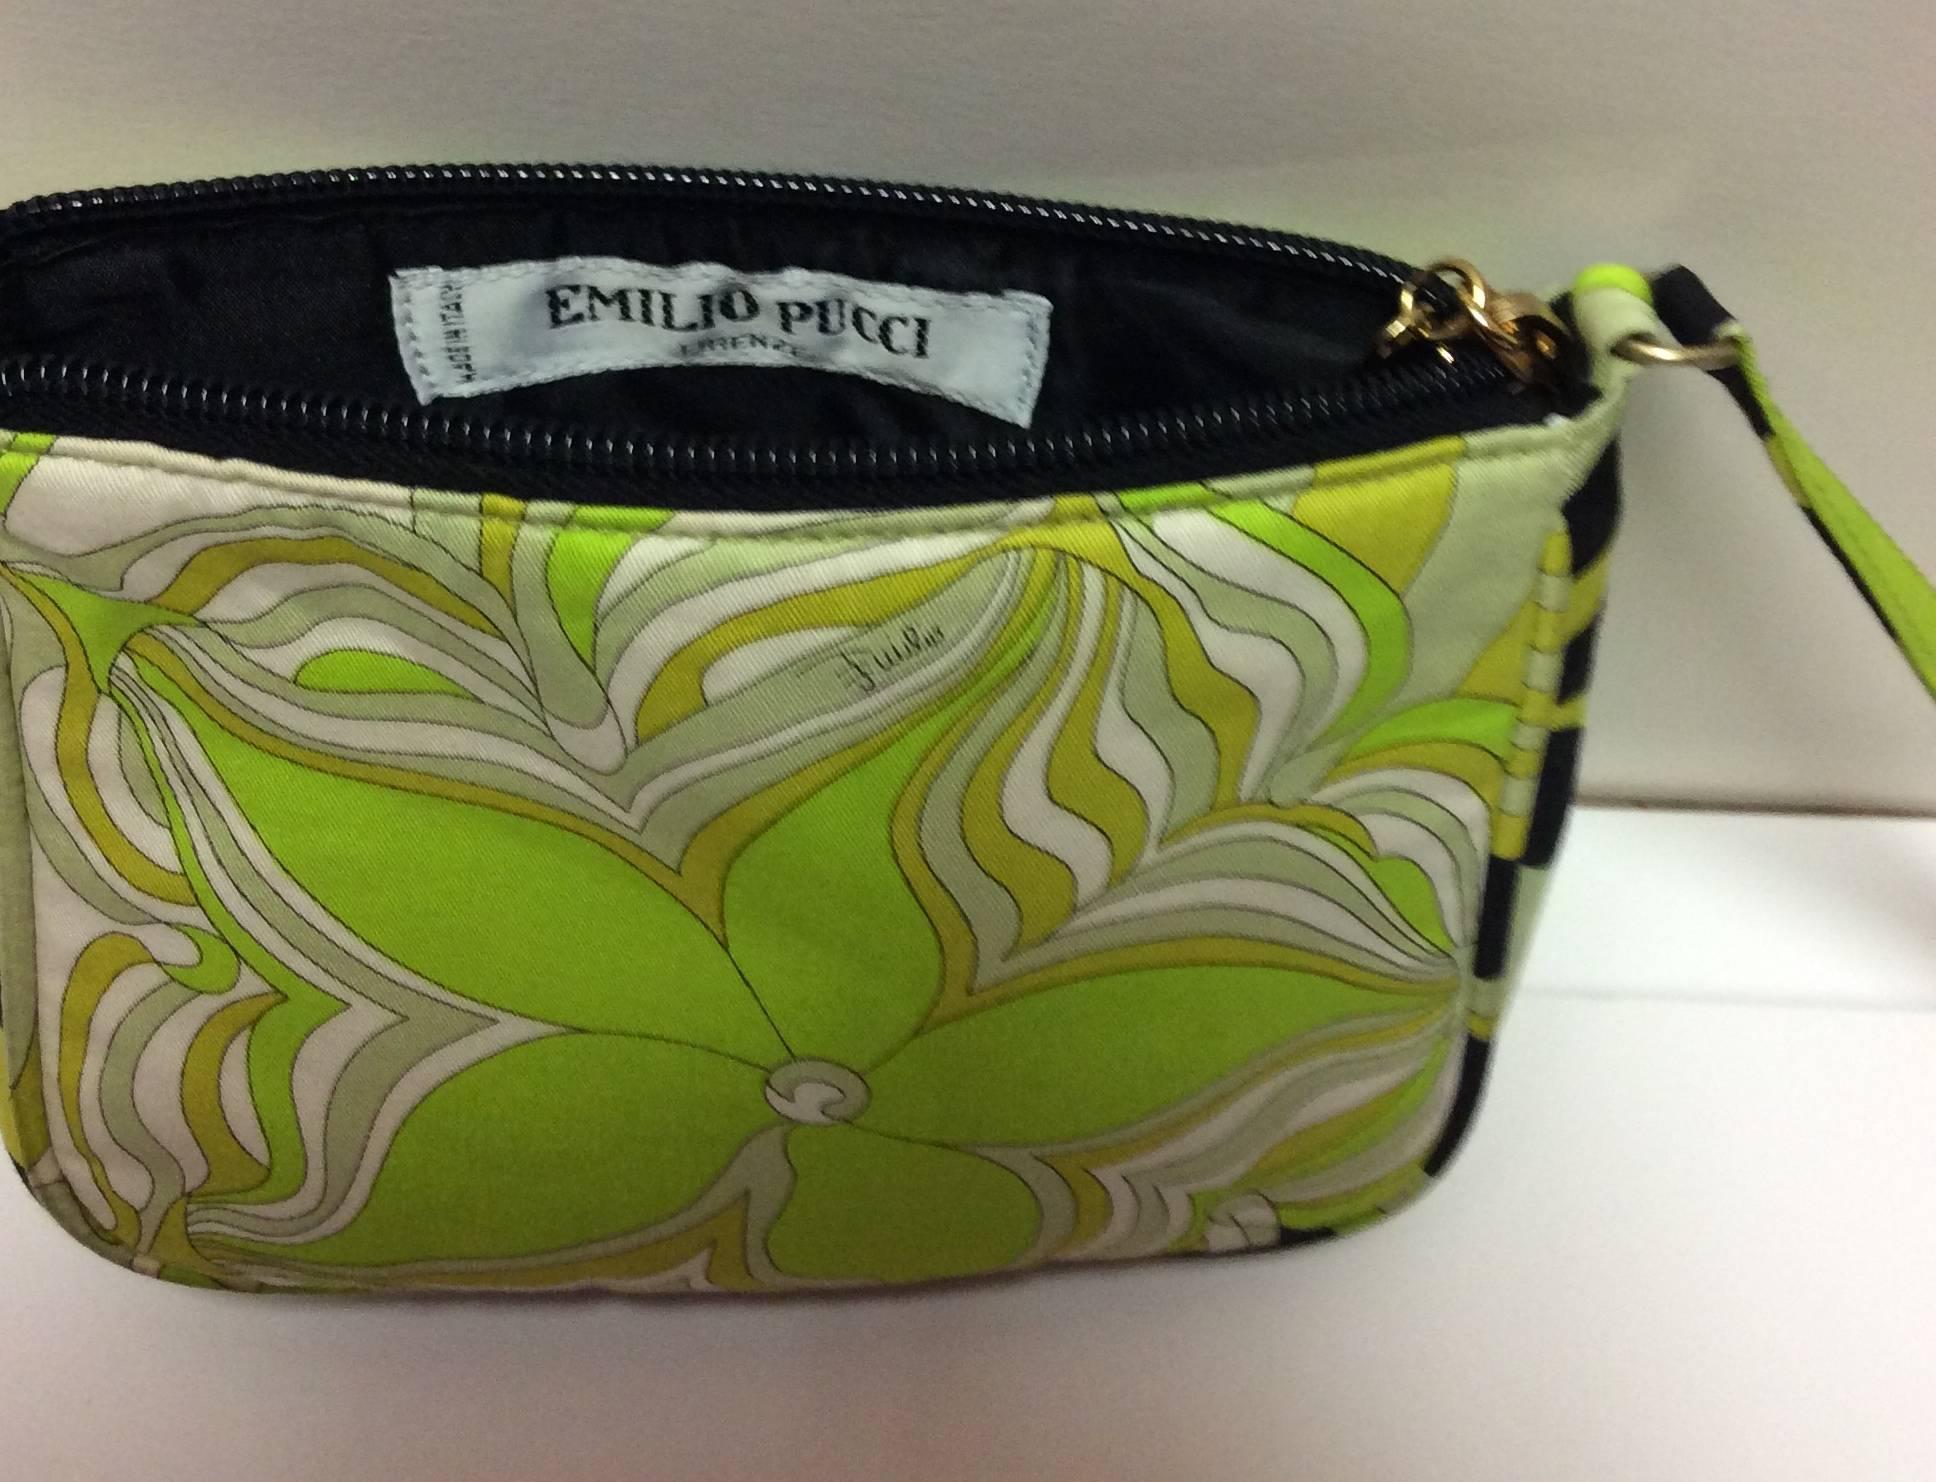 This is a darling little 100% silk Emilio Pucci mini handbag or can be used to connect to your purse as a little pochette. The pochette is 5.5 inches high, 7 inches long, and 1 inch wide at the top and 2 inch wide at the bottom. The beautiful